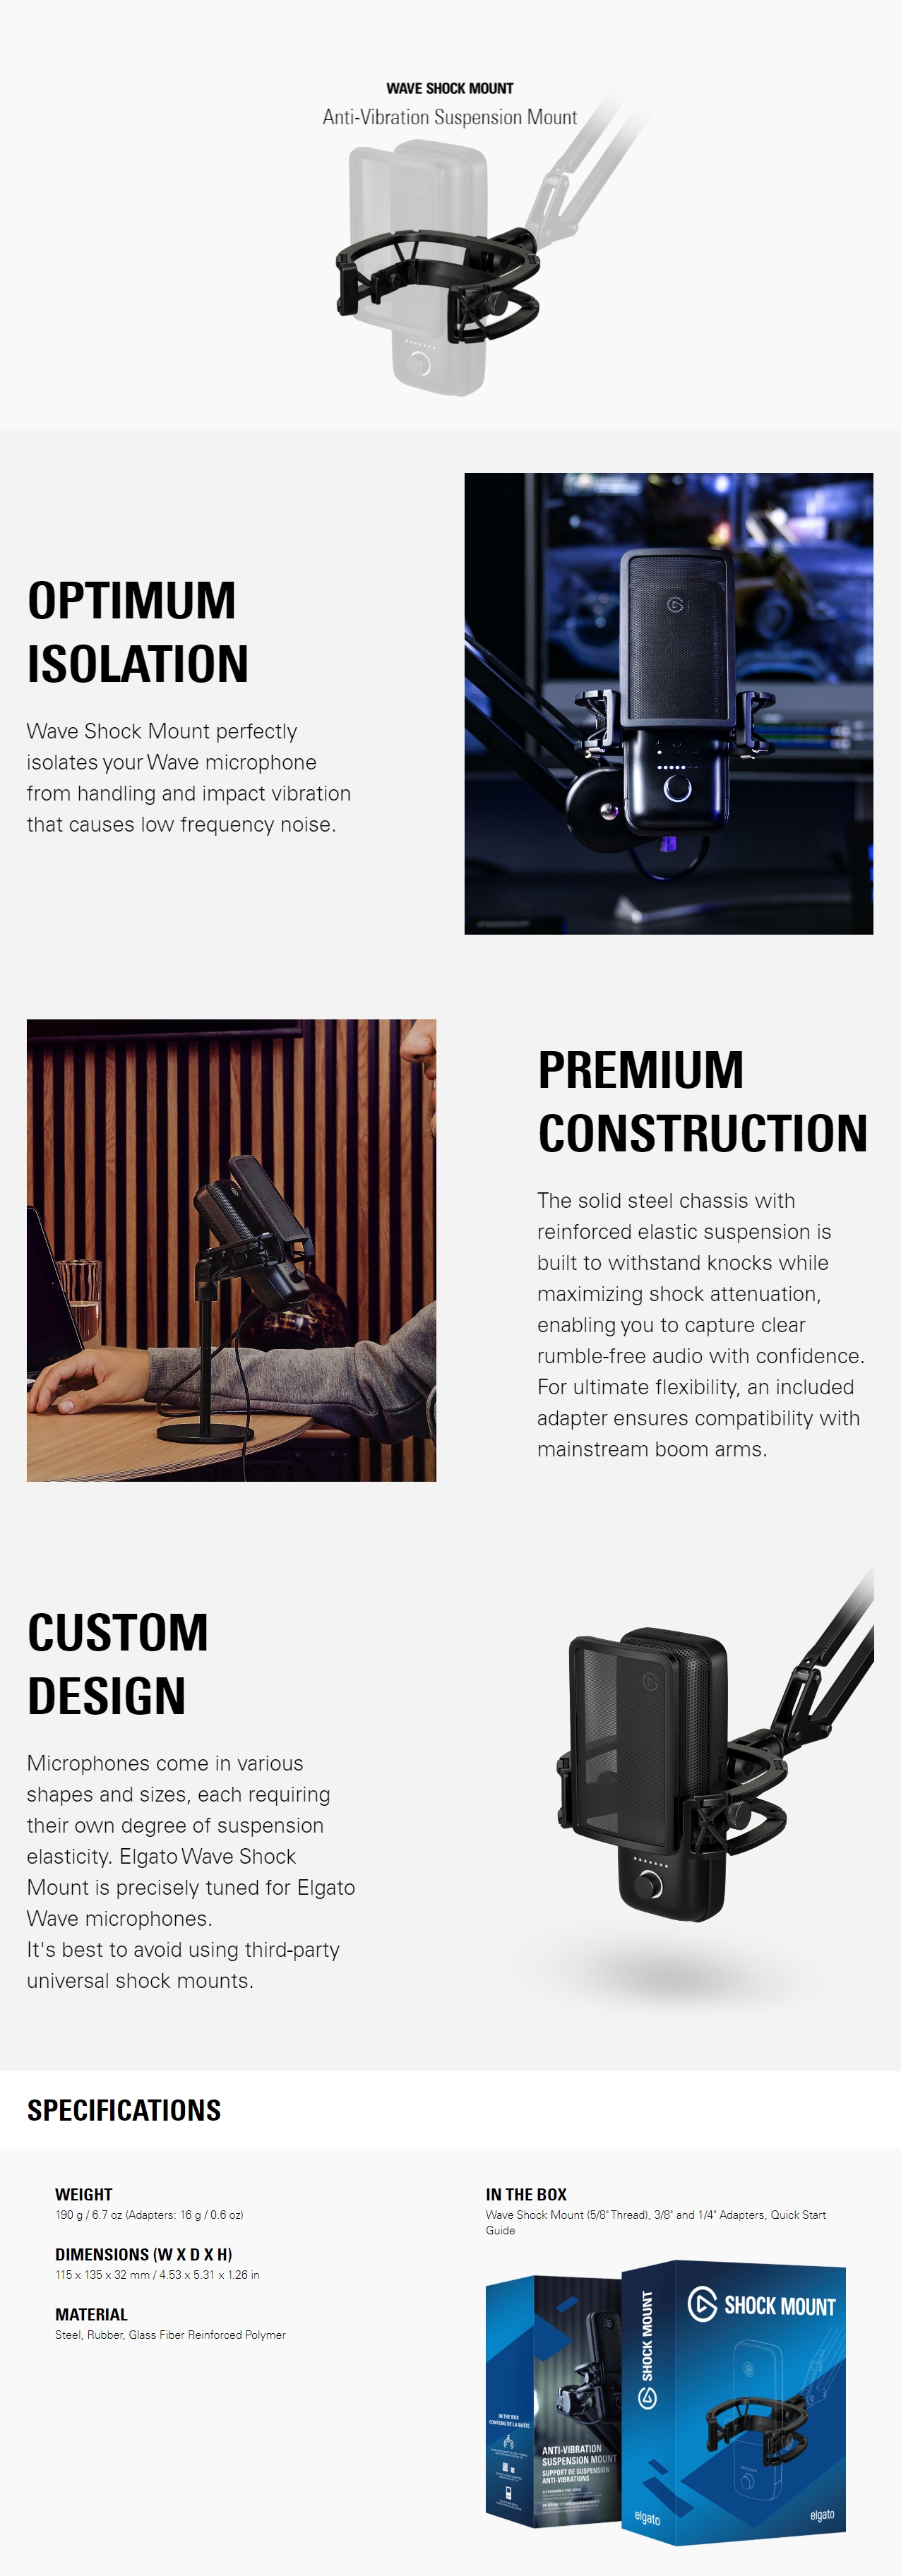 A large marketing image providing additional information about the product Elgato Shock Mount For Wave Microphone - Additional alt info not provided